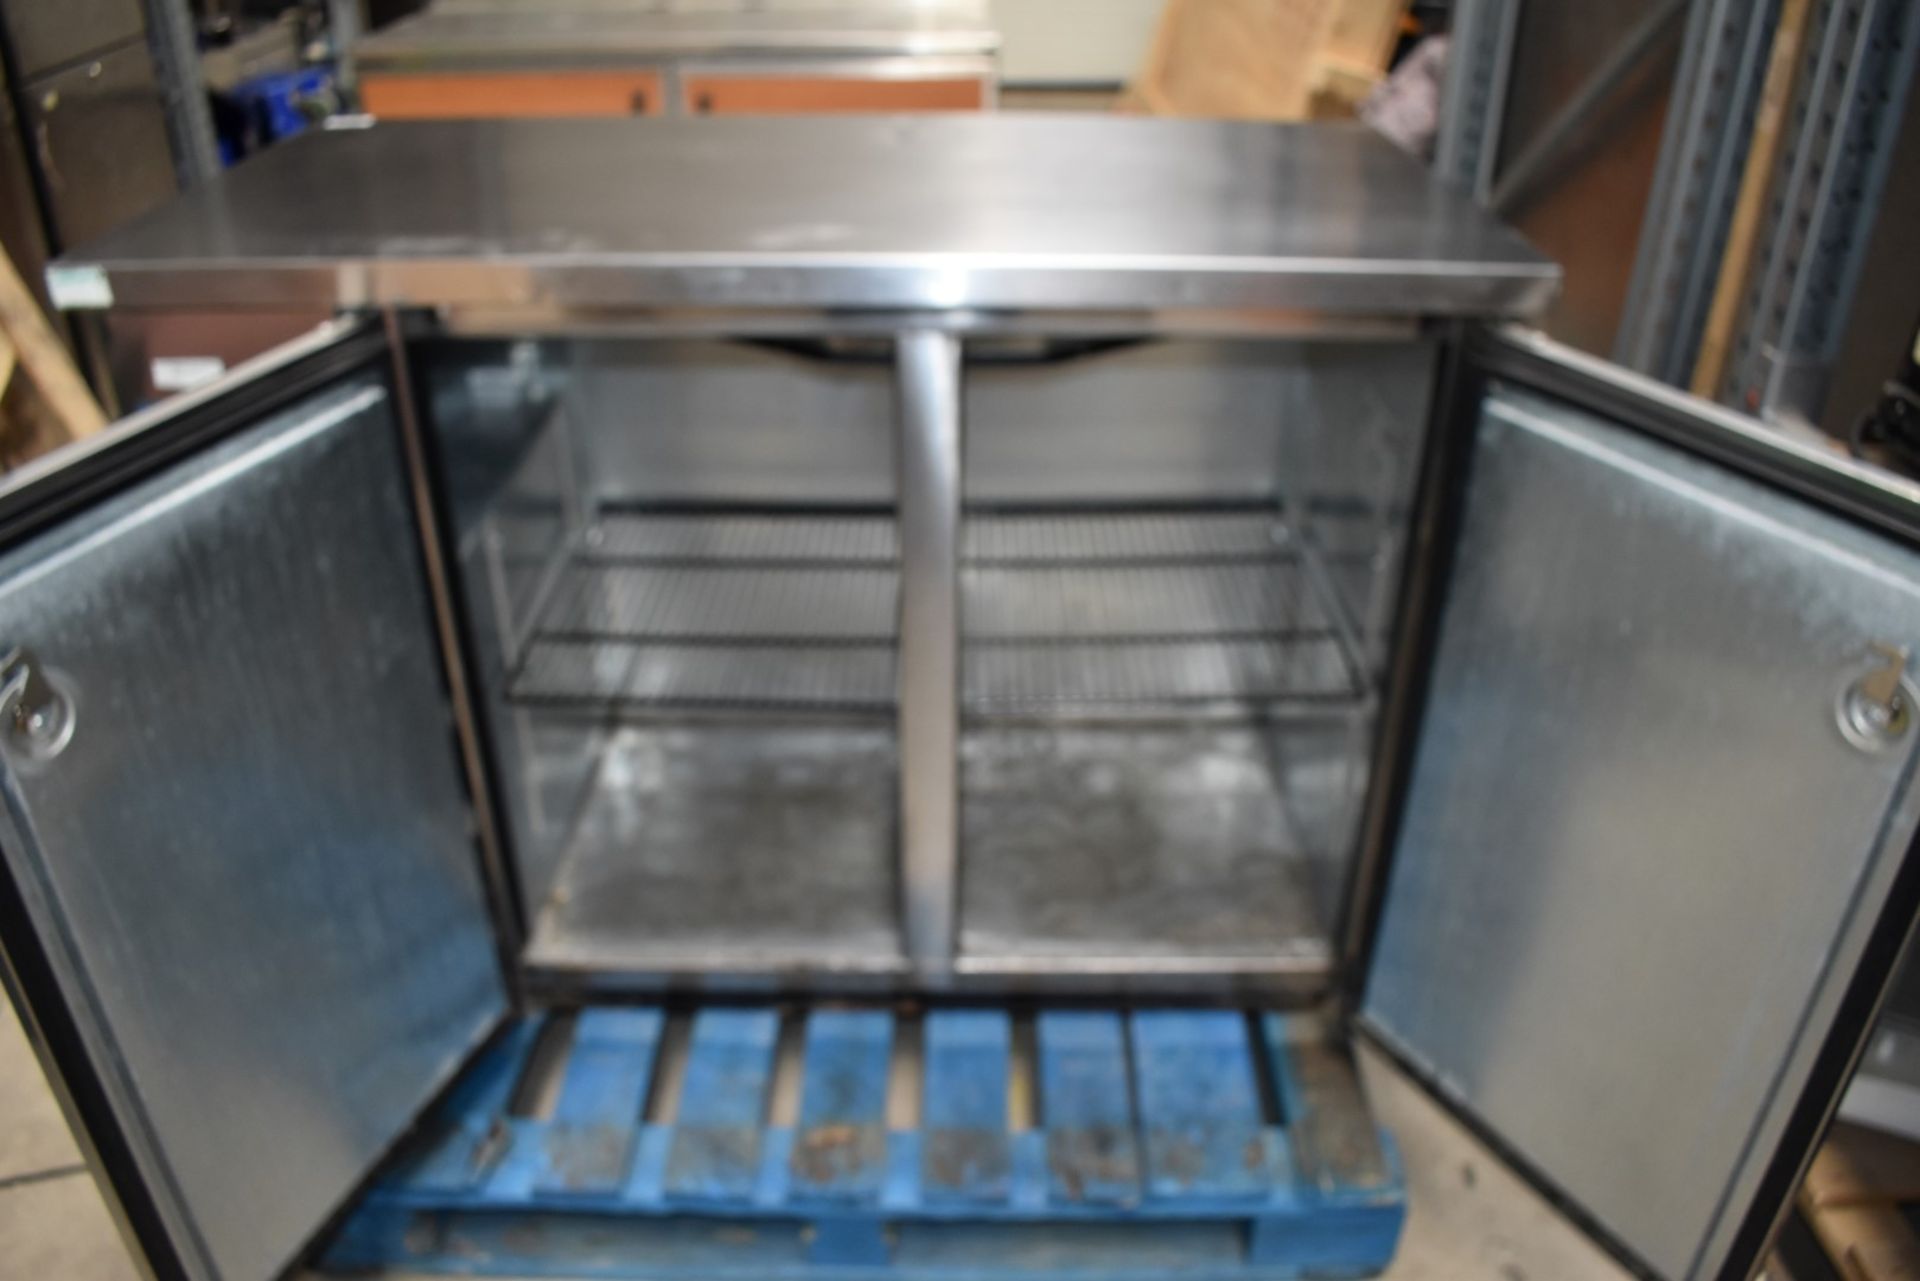 1 x True Back Bar Bottle Cooler With Solid Stainless Steel Doors and Counter Top - Model TBB-24-48-S - Image 7 of 10